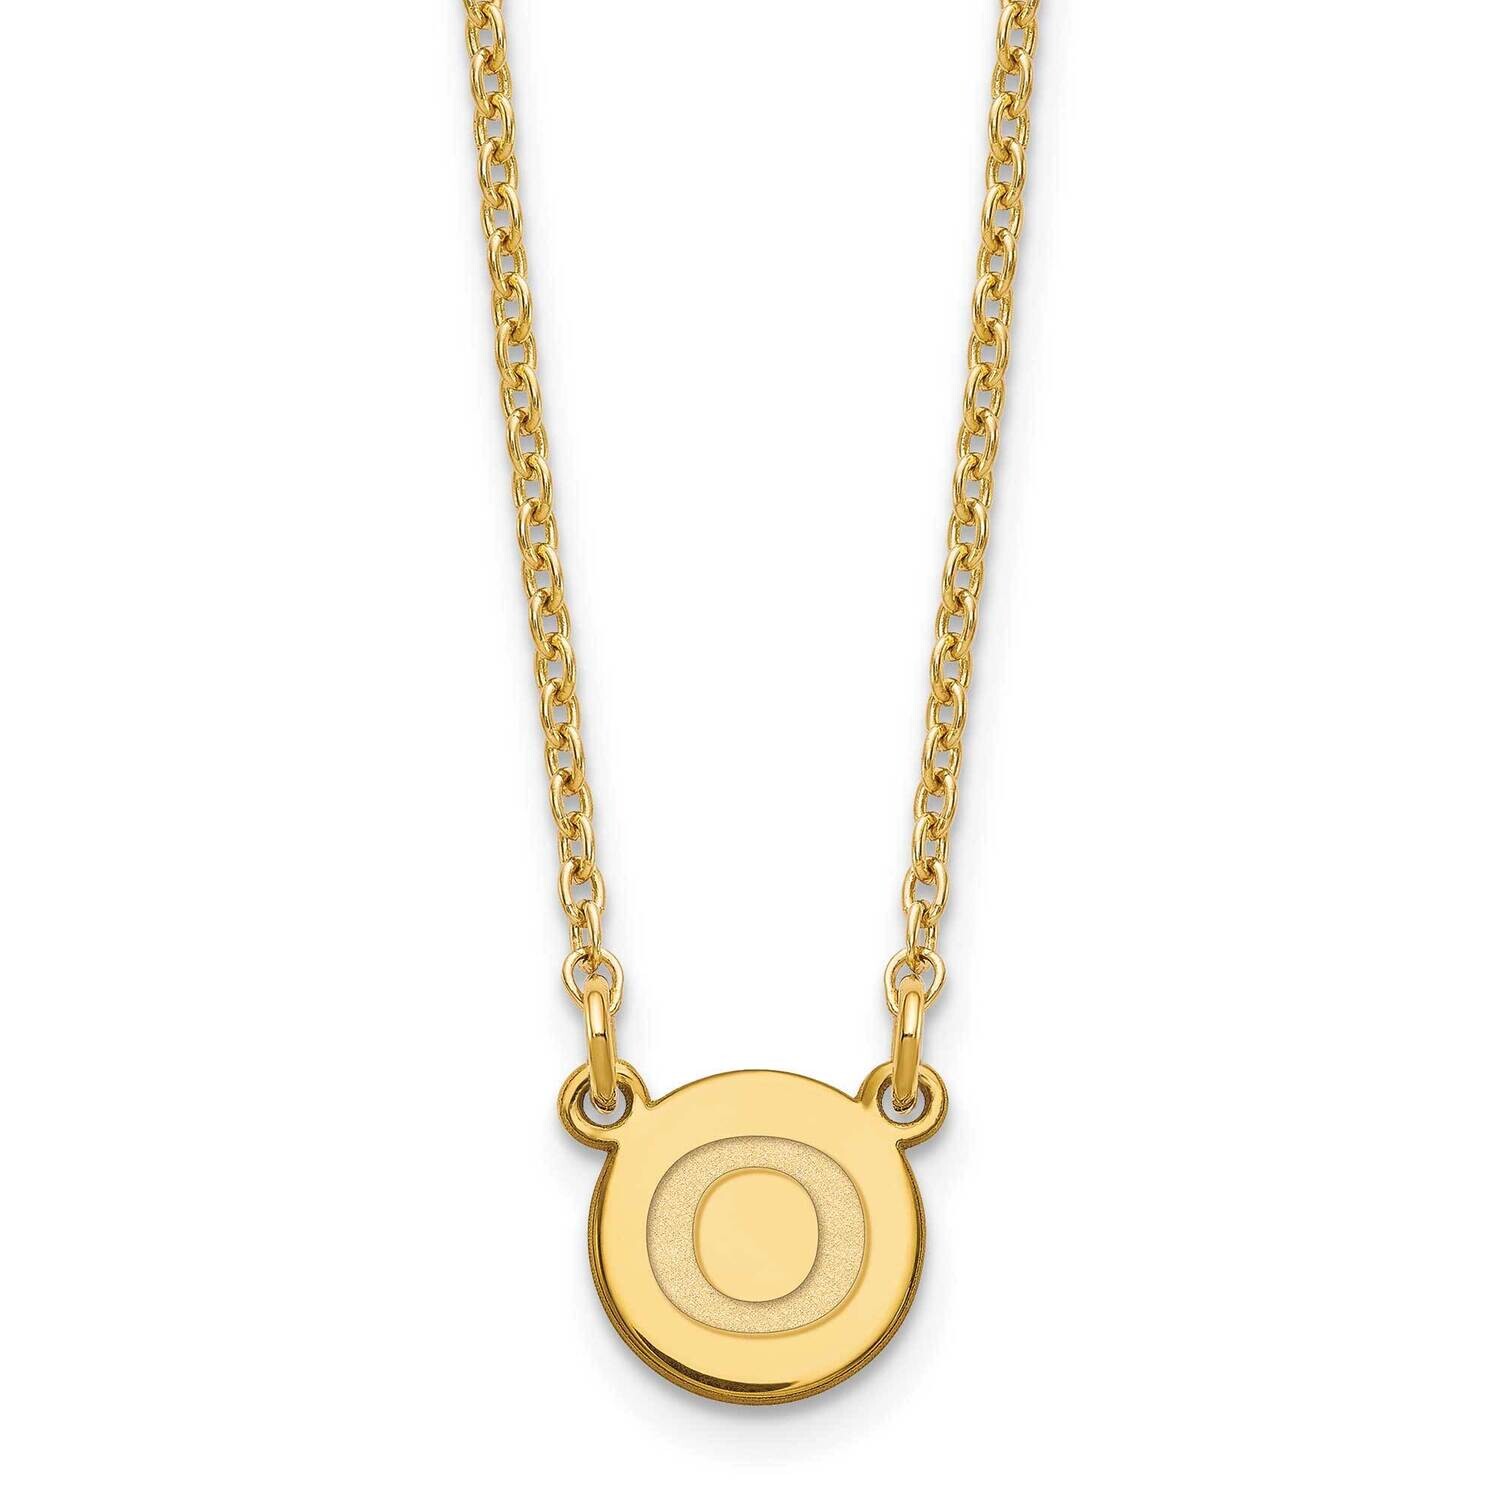 Gold-Plated Tiny Circle Block Letter O Initial Necklace Sterling Silver XNA722GP/O